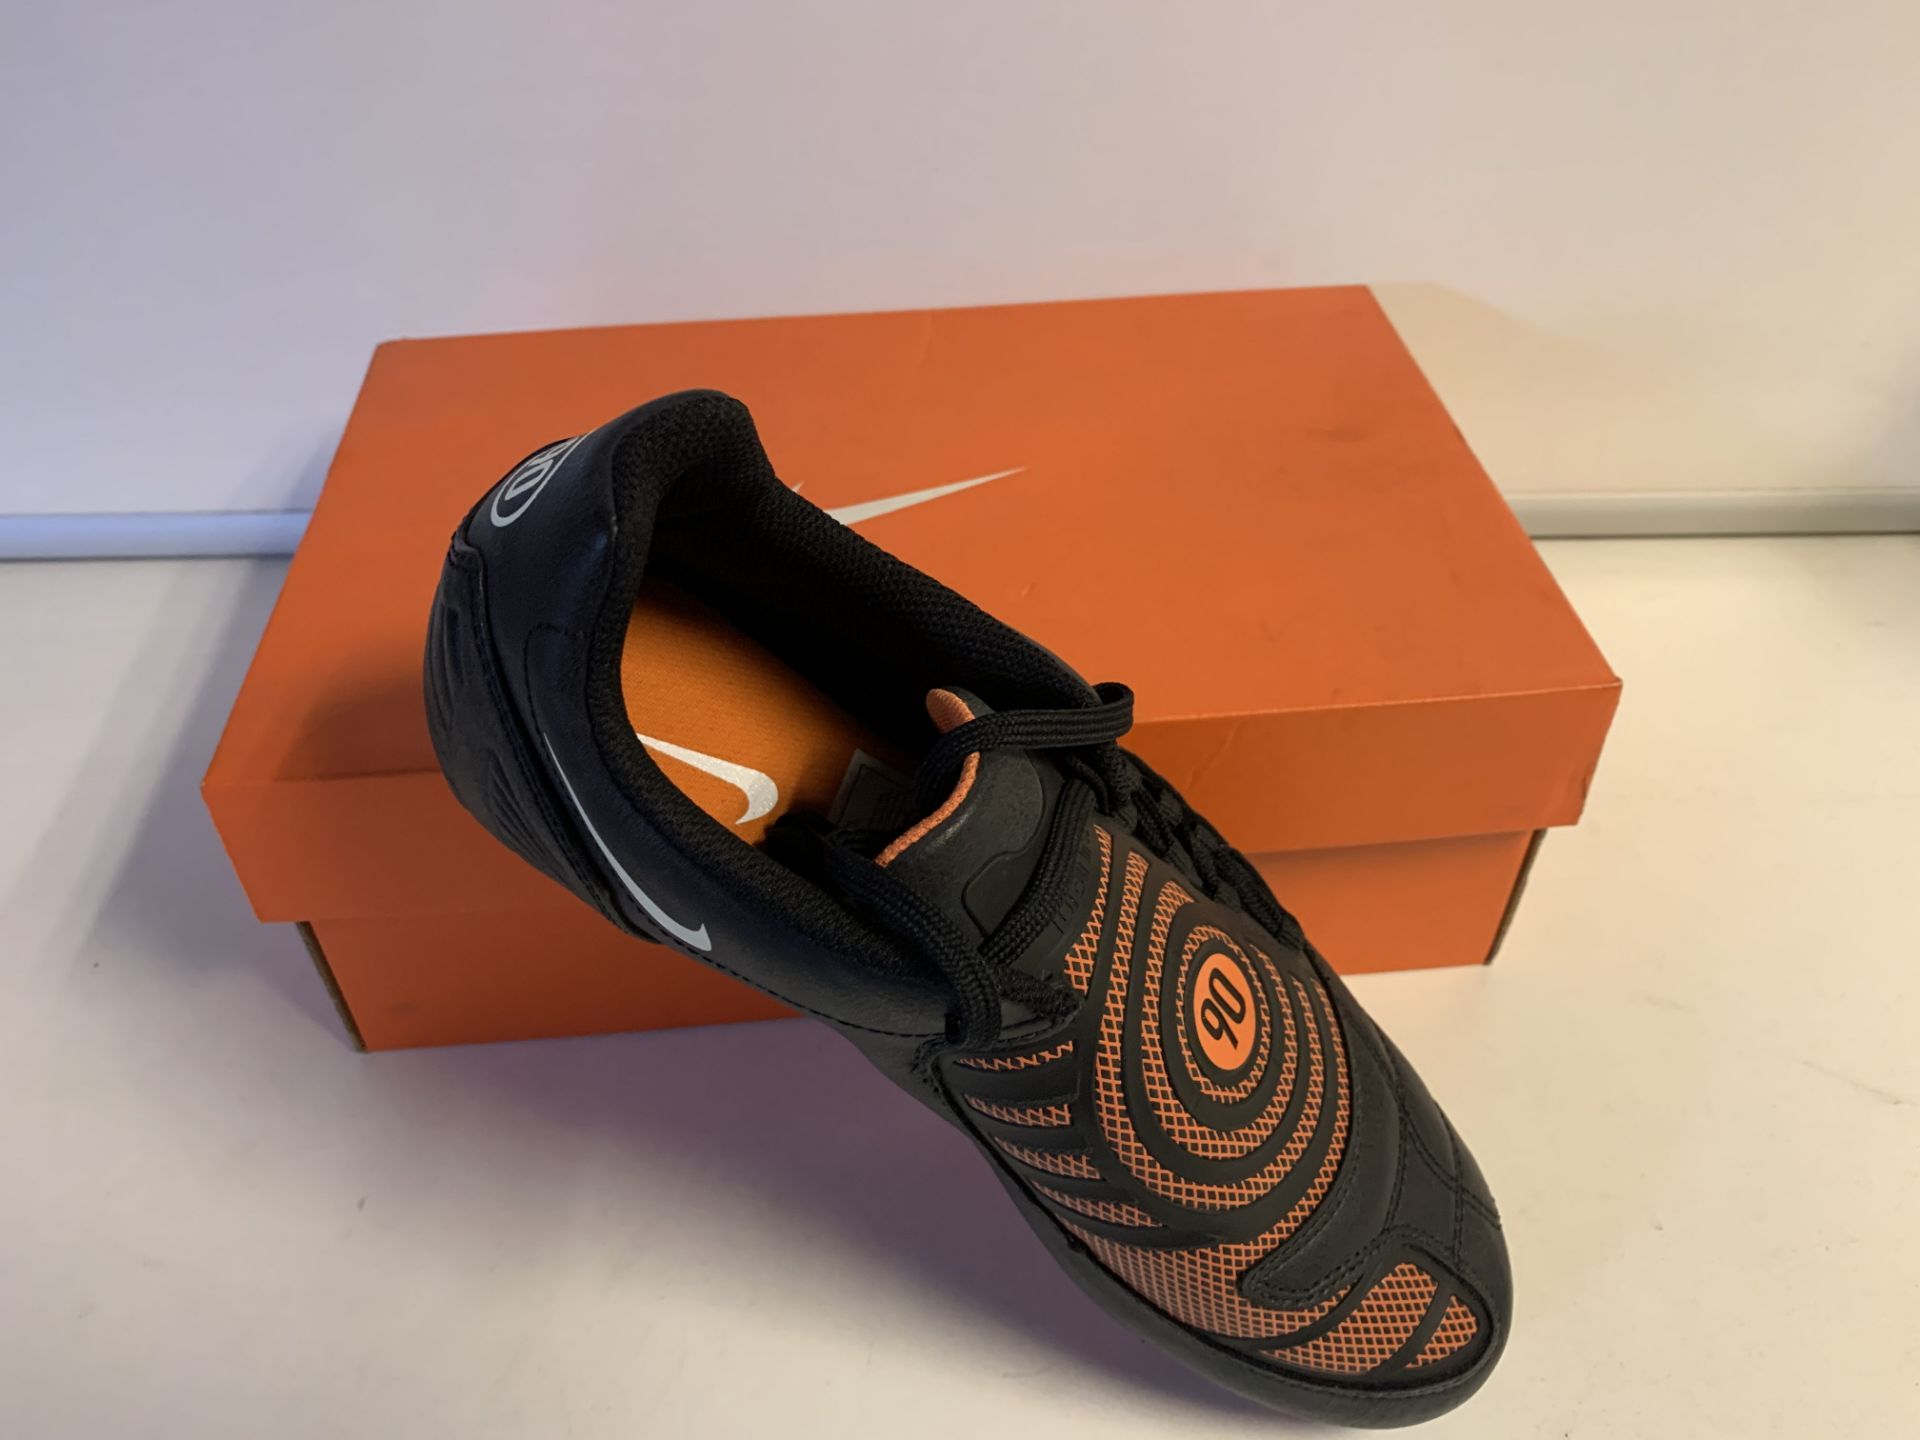 (NO VAT) 3 X BRAND NEW RETAIL BOXED NIKE JR TOTAL 90 SHOOT 2 EXTRA SG FOOTBALL BOOTS SIZE 5 (297/